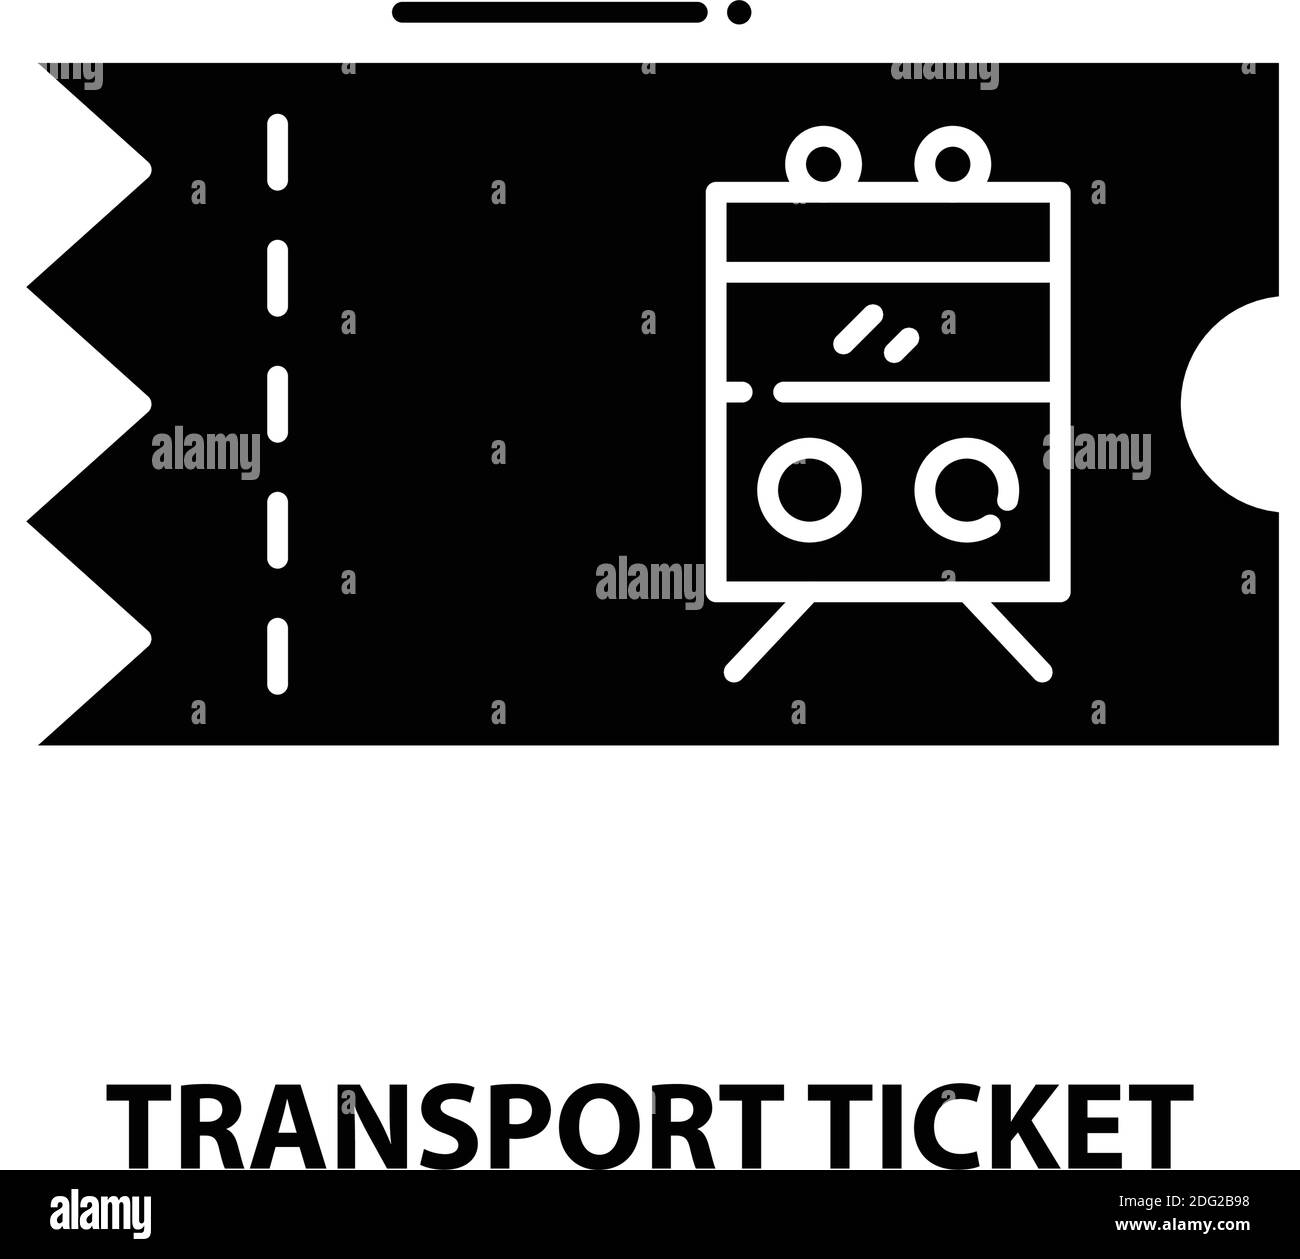 transport ticket icon, black vector sign with editable strokes, concept illustration Stock Vector